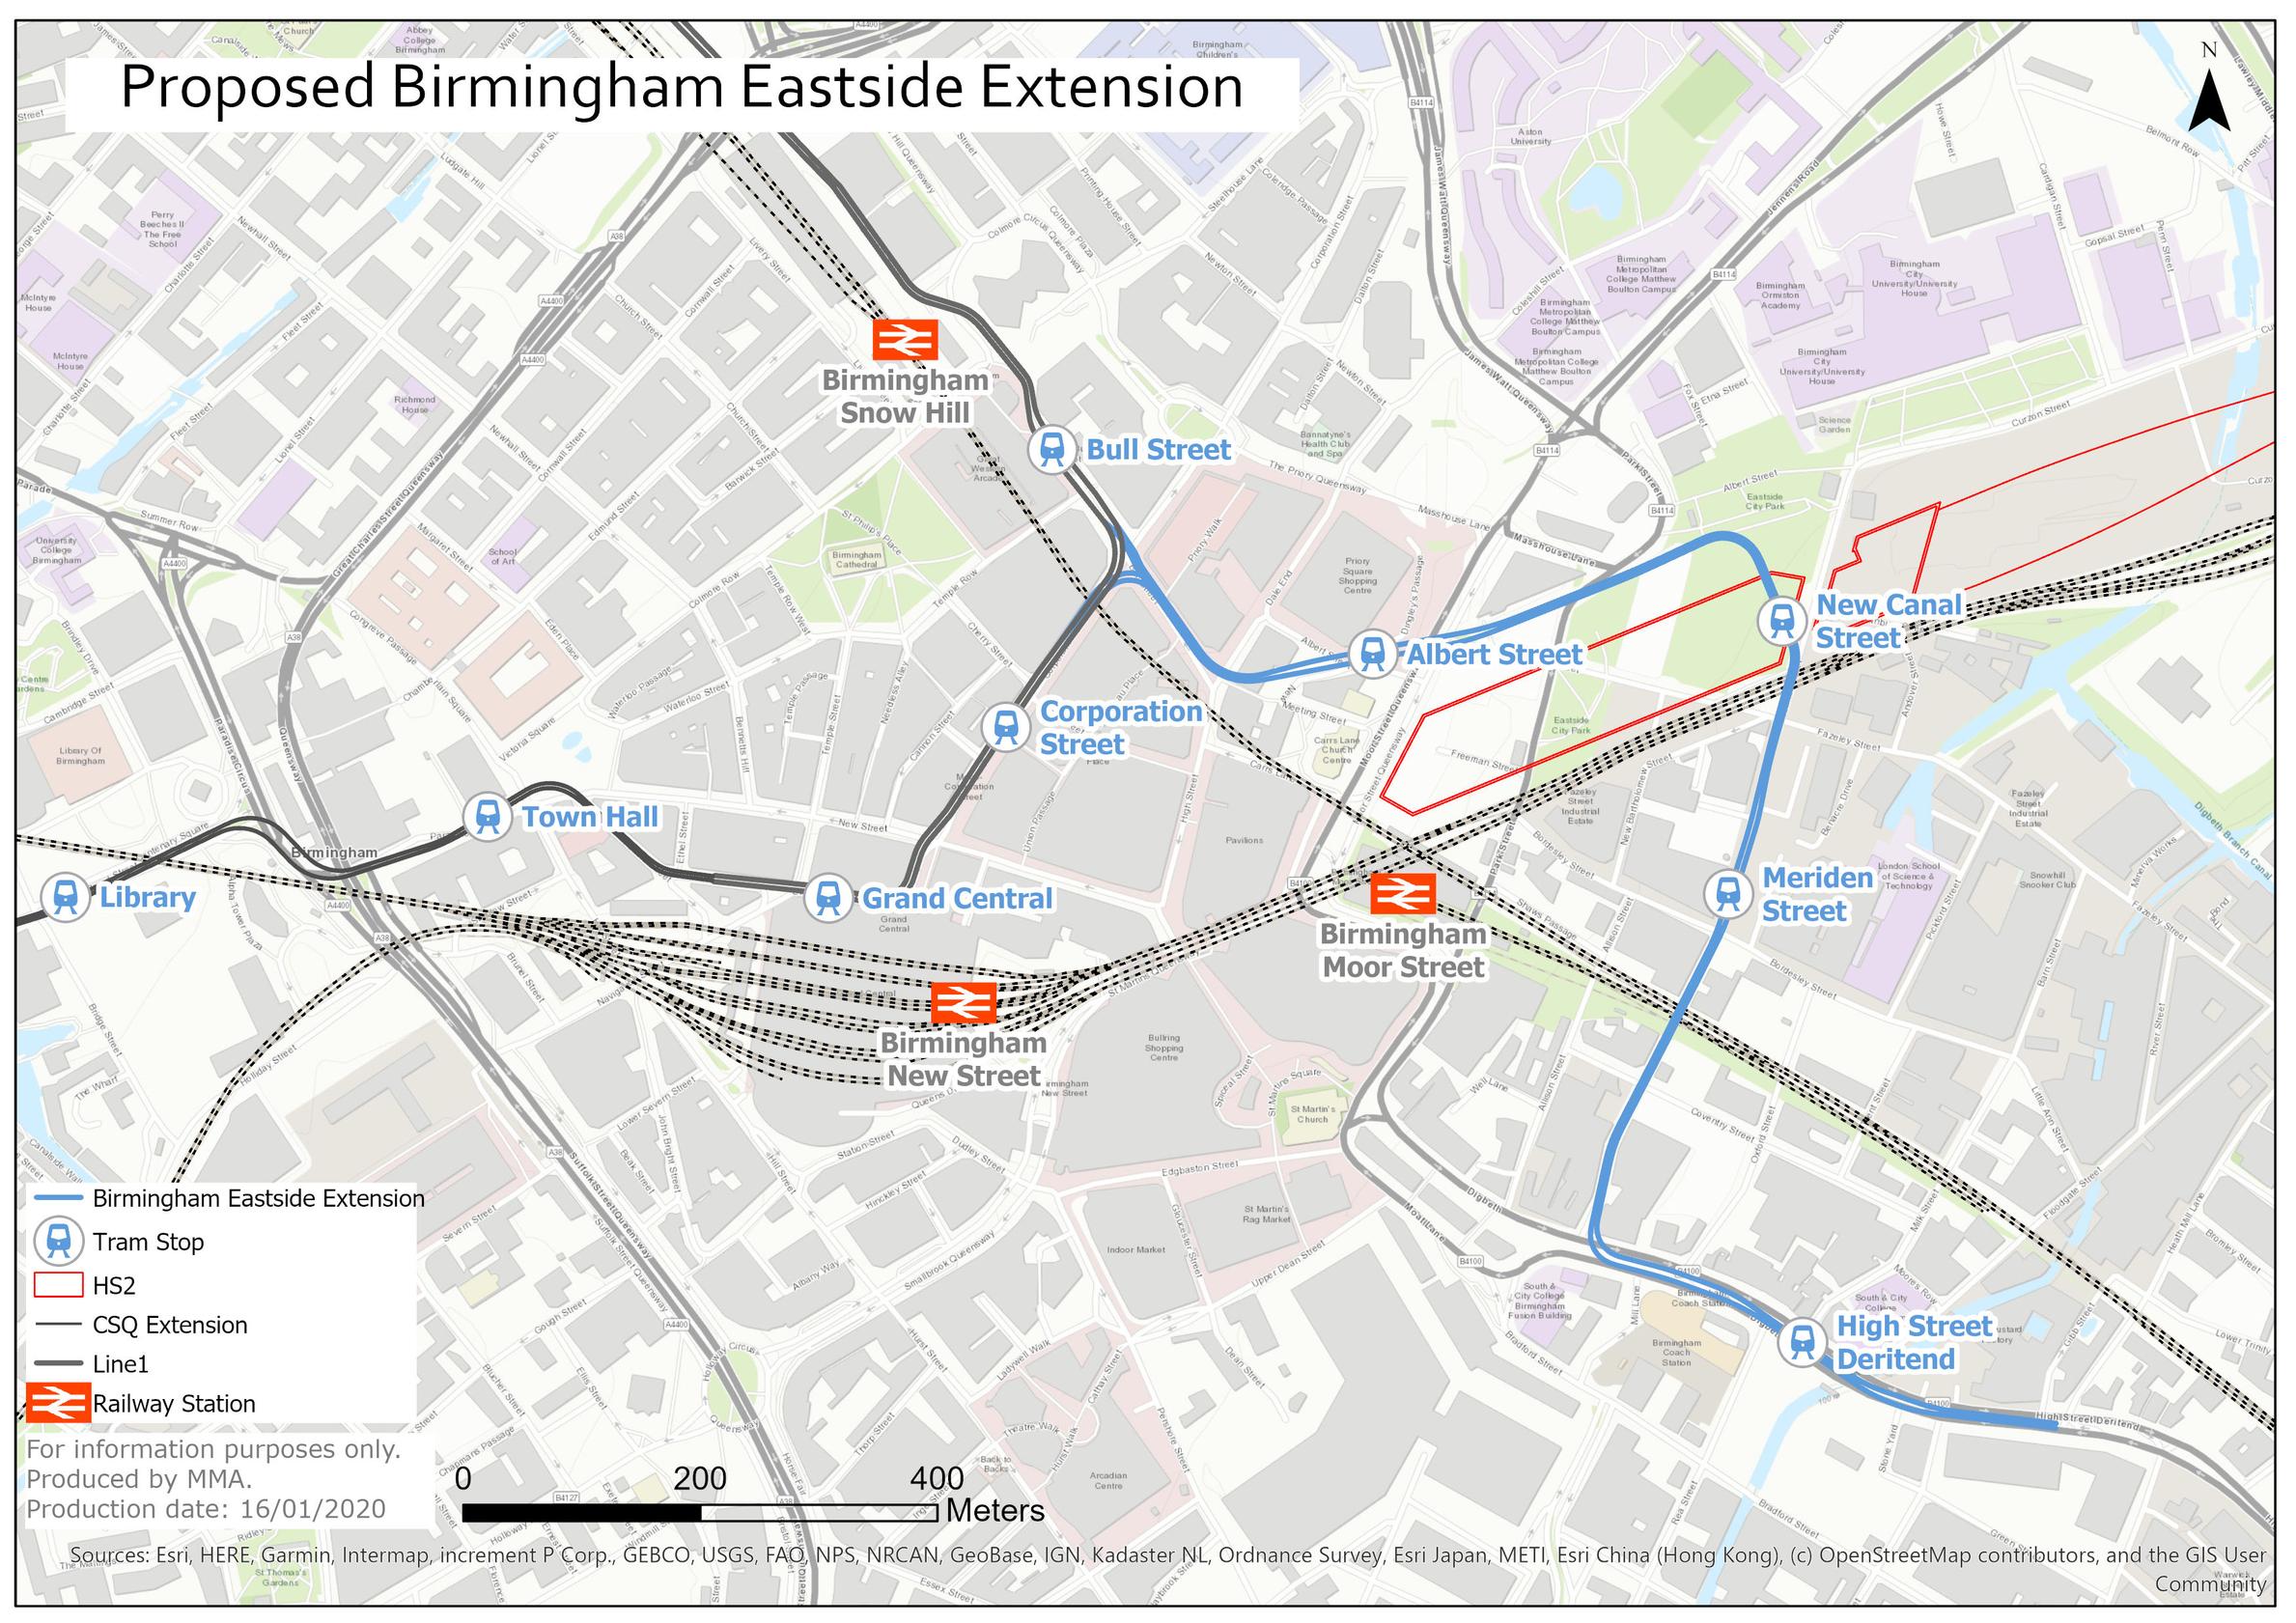 The Birmingham Eastside extension will run from the existing Metro line at Bull Street to High Street Deritend in Digbeth, via the proposed HS2 Curzon Street Station